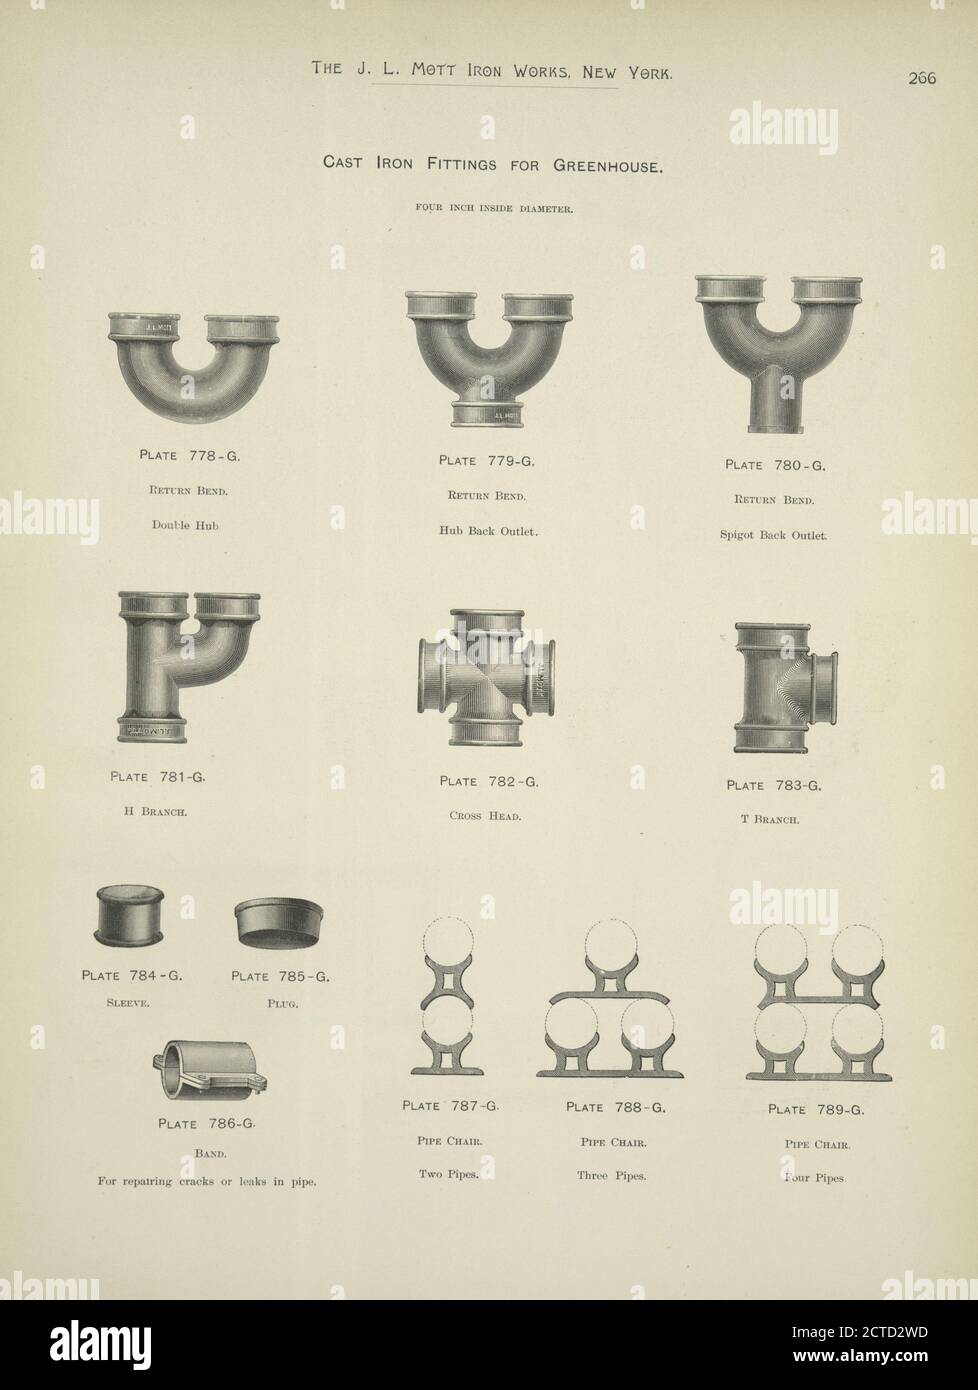 Cast Iron Fittings for Greenhouse., still image, Prints, 1888 Stock Photo